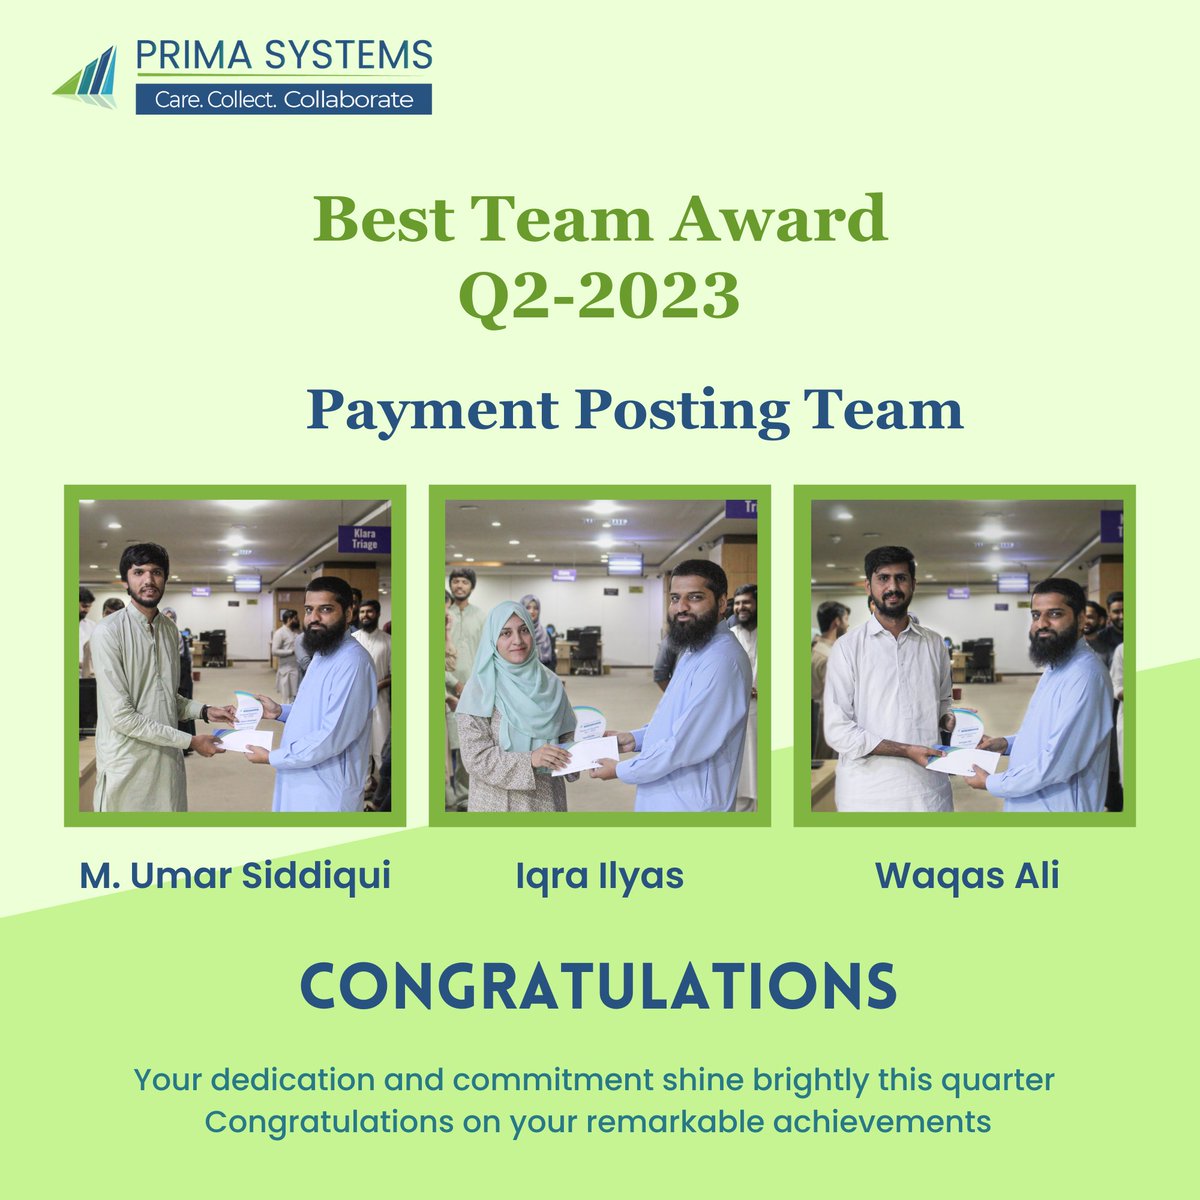 Celebrating the incredible achievements of our 'Payment Posting Team' for winning the Best Team of the Quarter! Let's continue to reach new heights together!
#primasystems #ushealthcare #employeeappreciation  #TeamOfTheQuarter #paymentpostingteam #AchievementUnlocked